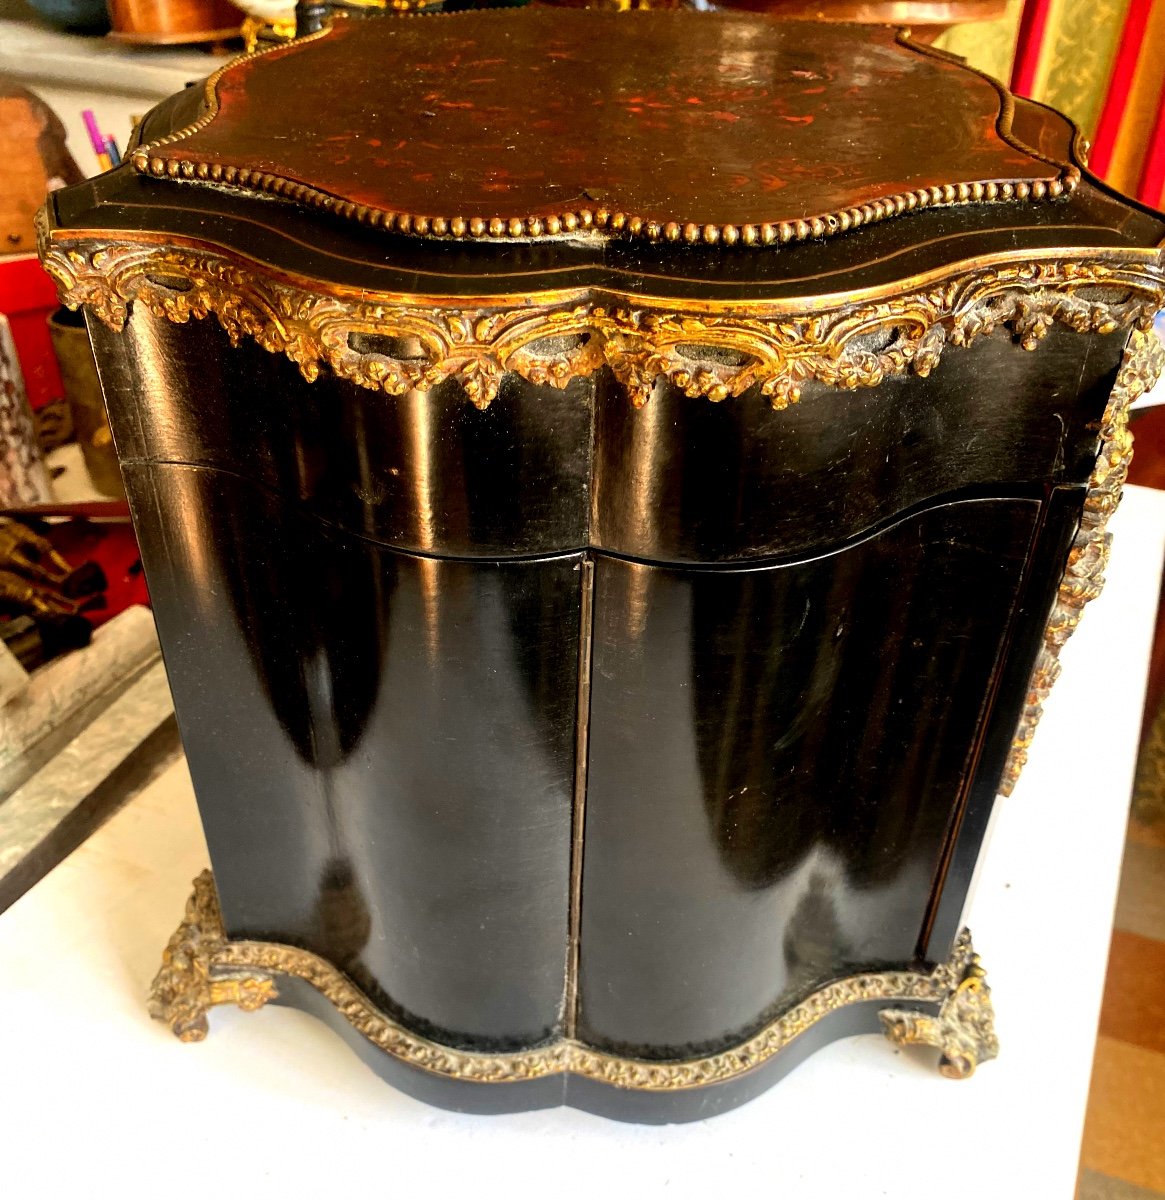 Rare And Beautiful Salon Liqueur Cabaret In Very Ornate Red Tortoise Shell Marquetry-photo-1